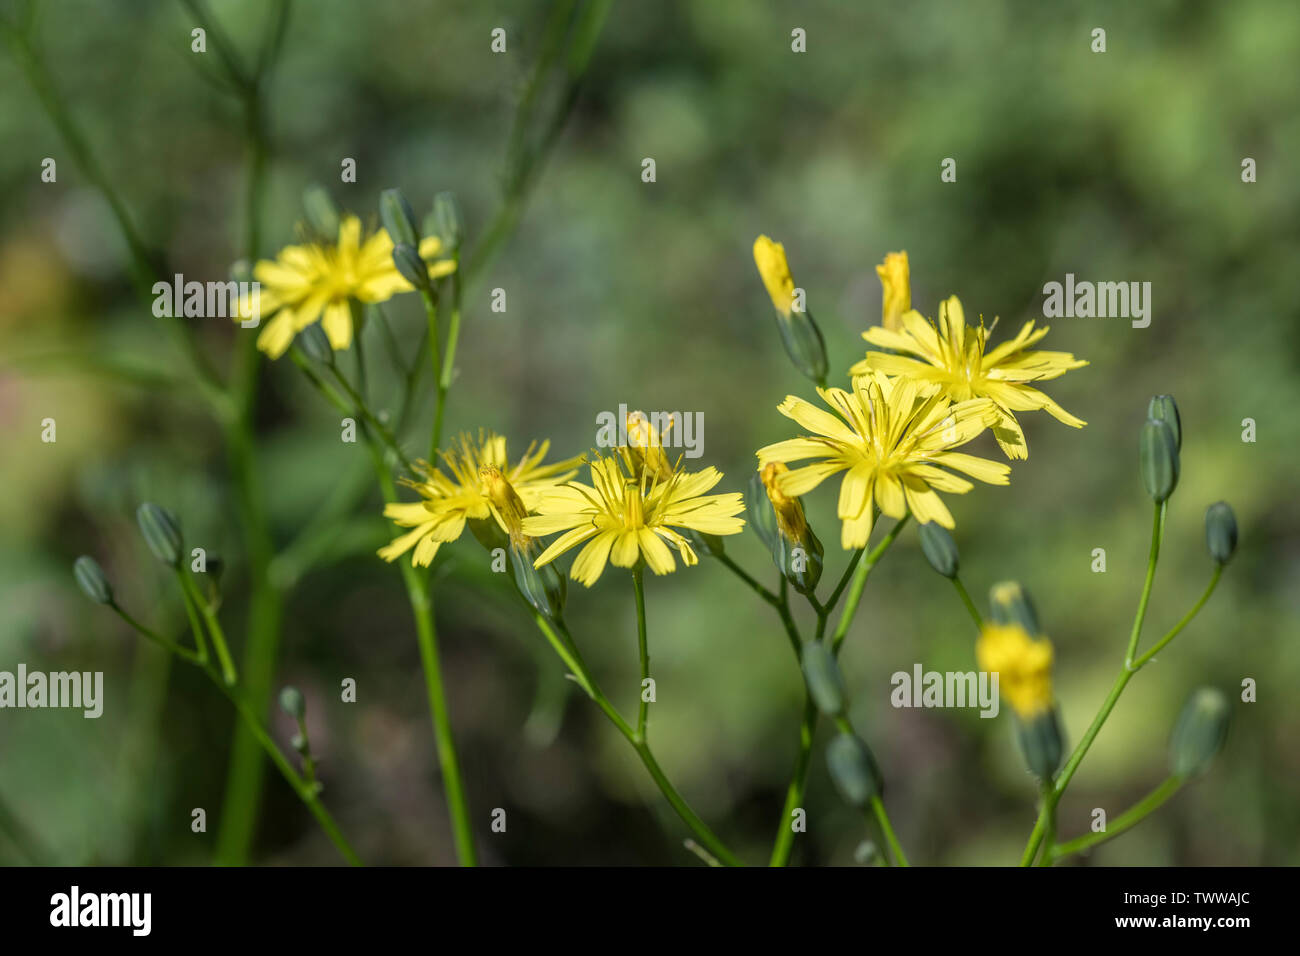 Yellow flowers of Nipplewort / Lapsana communis. Young leaves may be eaten cooked as a survival food. Stock Photo